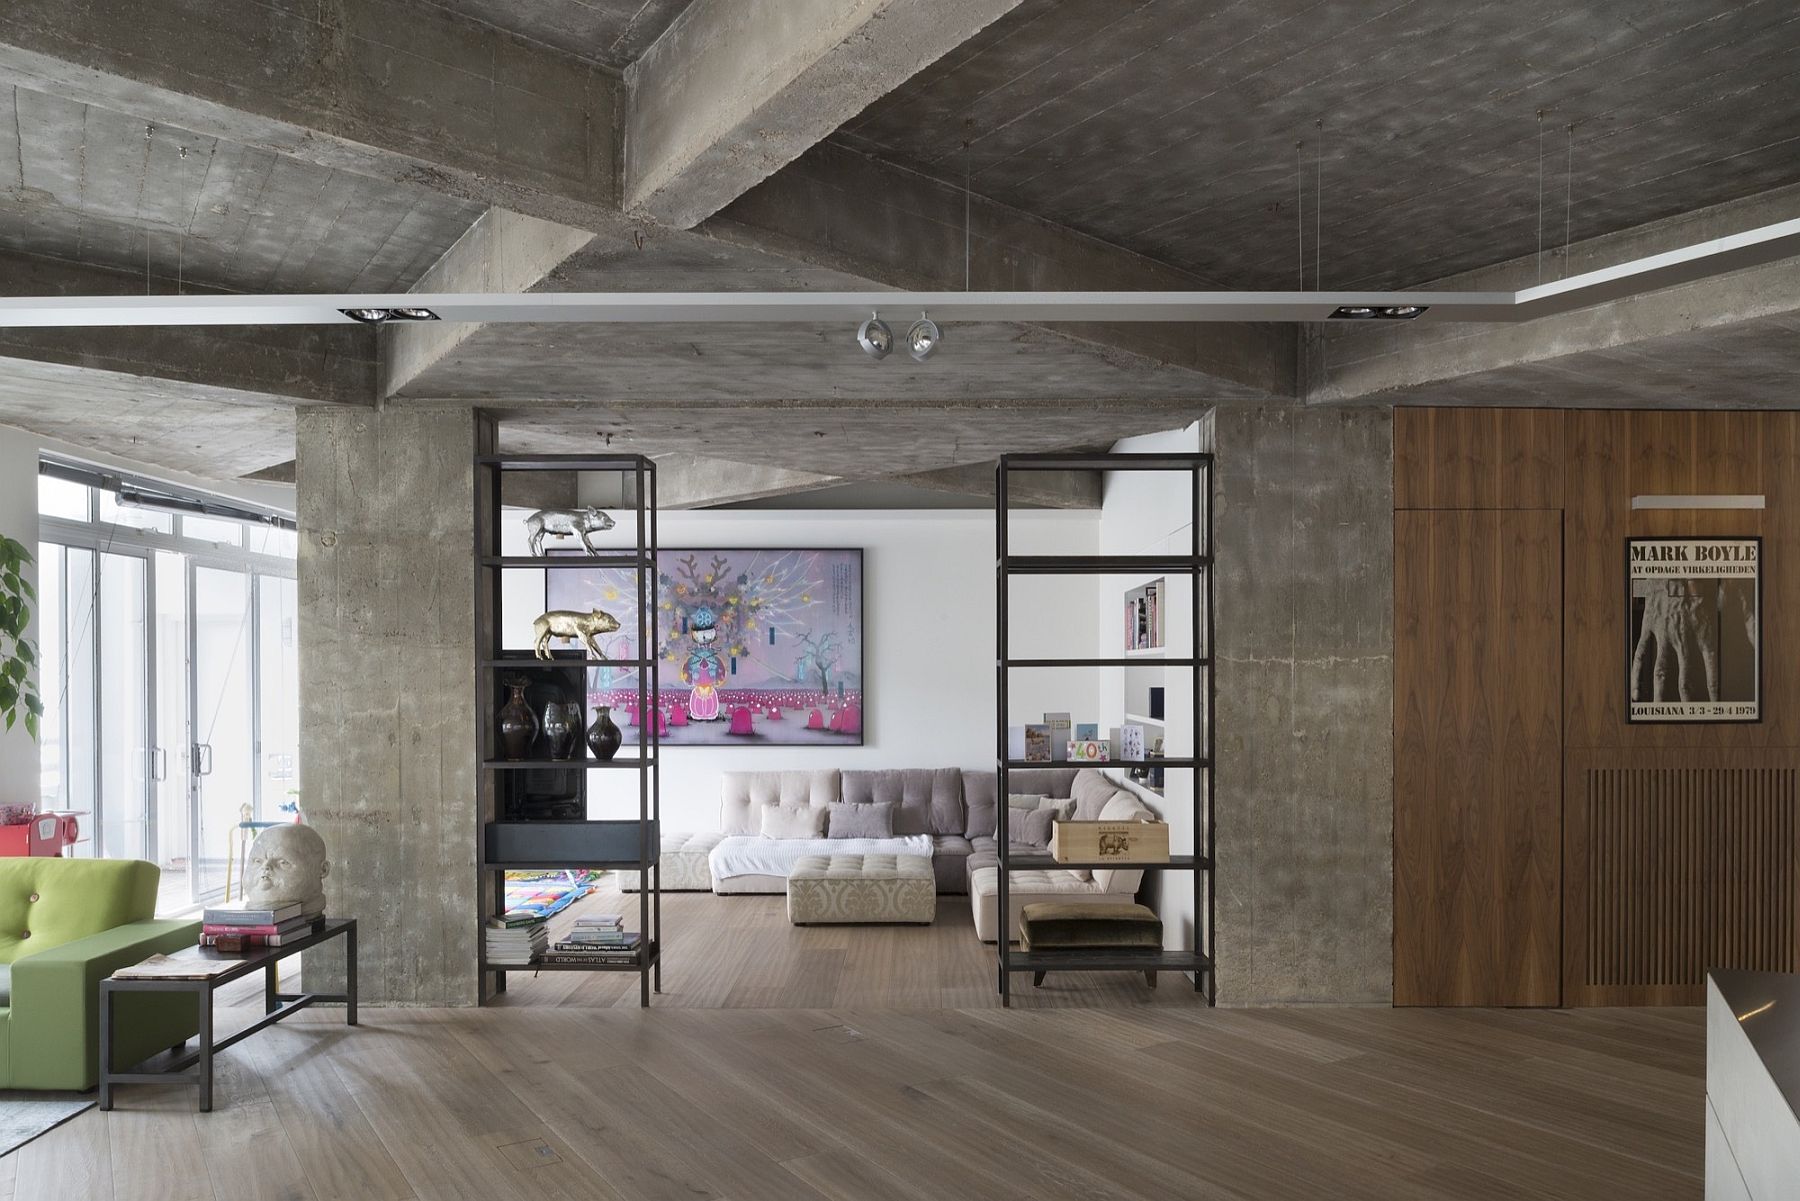 Exposed concrete walls and wooden flooring shape a stylish industrial loft